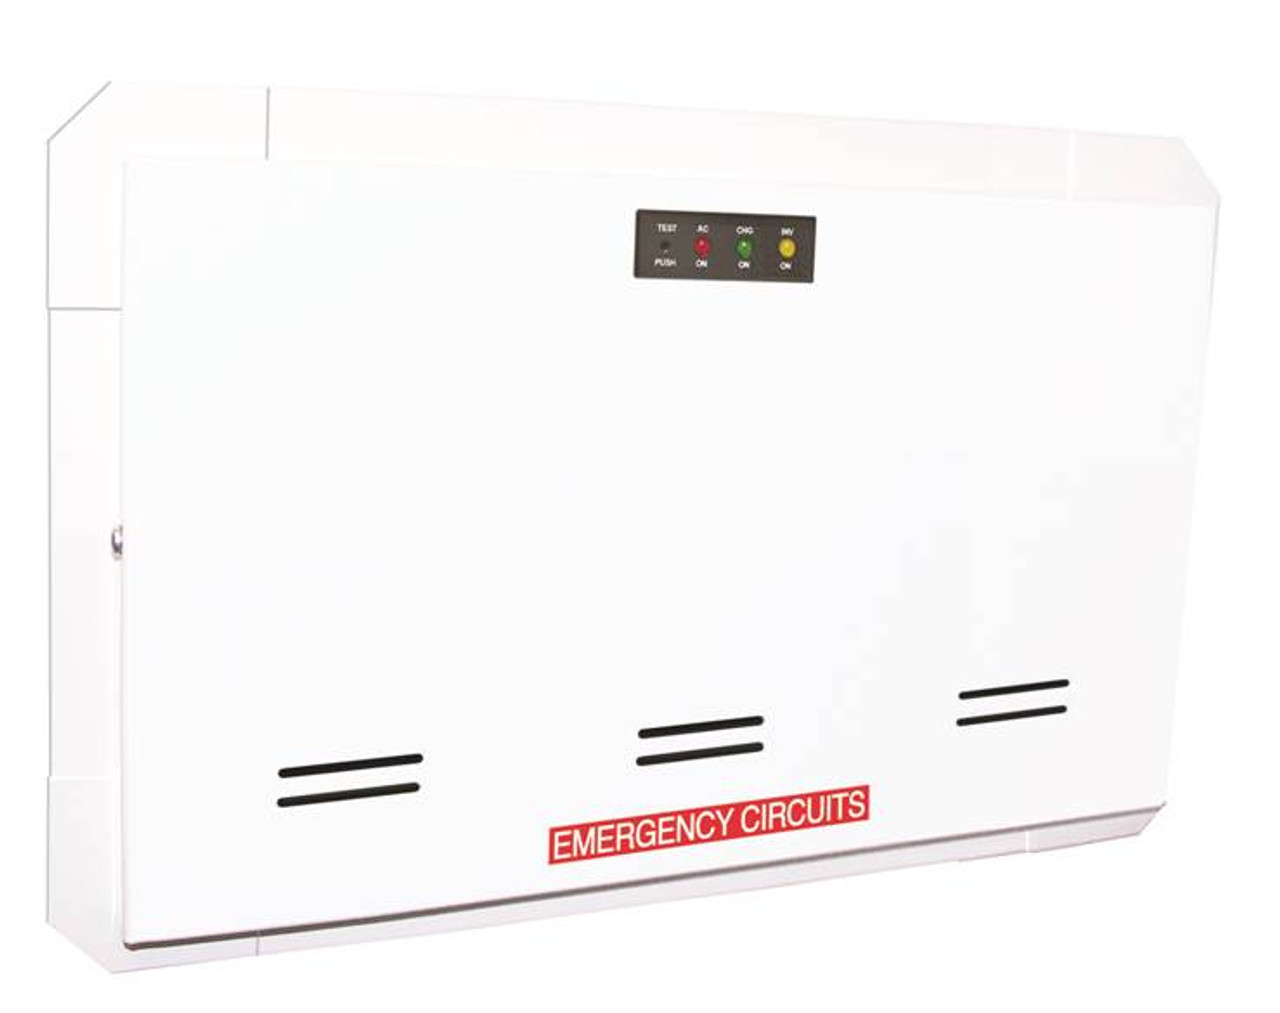 MPS Series inverter systems are designed to provide sinusoidal AC emergency power to connected incandescent,
fluorescent or LED fixtures of between 20 and 55 watts.
Surface, recessed or ceiling T-Grid mount models are designed for easy installation either on or near controlled fixtures. MPS models support Normally-ON, Normally-OFF or SWITCHED operation.
Input Voltages: 120 or 277VAC field selectable.
Input Frequencies: 60Hz ±2%
Input Protection: Provided by Service Panel, Rated 20A max.
Output Voltages: (60Hz) 120 or 277VAC
Waveform: Sinusoidal (digitally controlled, PWM design)
Output Frequencies: 60Hz. ±0.3Hz during emergency cycle
Output Distortion: Less than 3% THD (linear load)
Output Protection: Inverter fuse
Heavy duty steel cabinet is finished in white baked-on powder paint providing scratch and corrosion resistance.
Optional special color paint (-SP) finishes are available, consult factory.